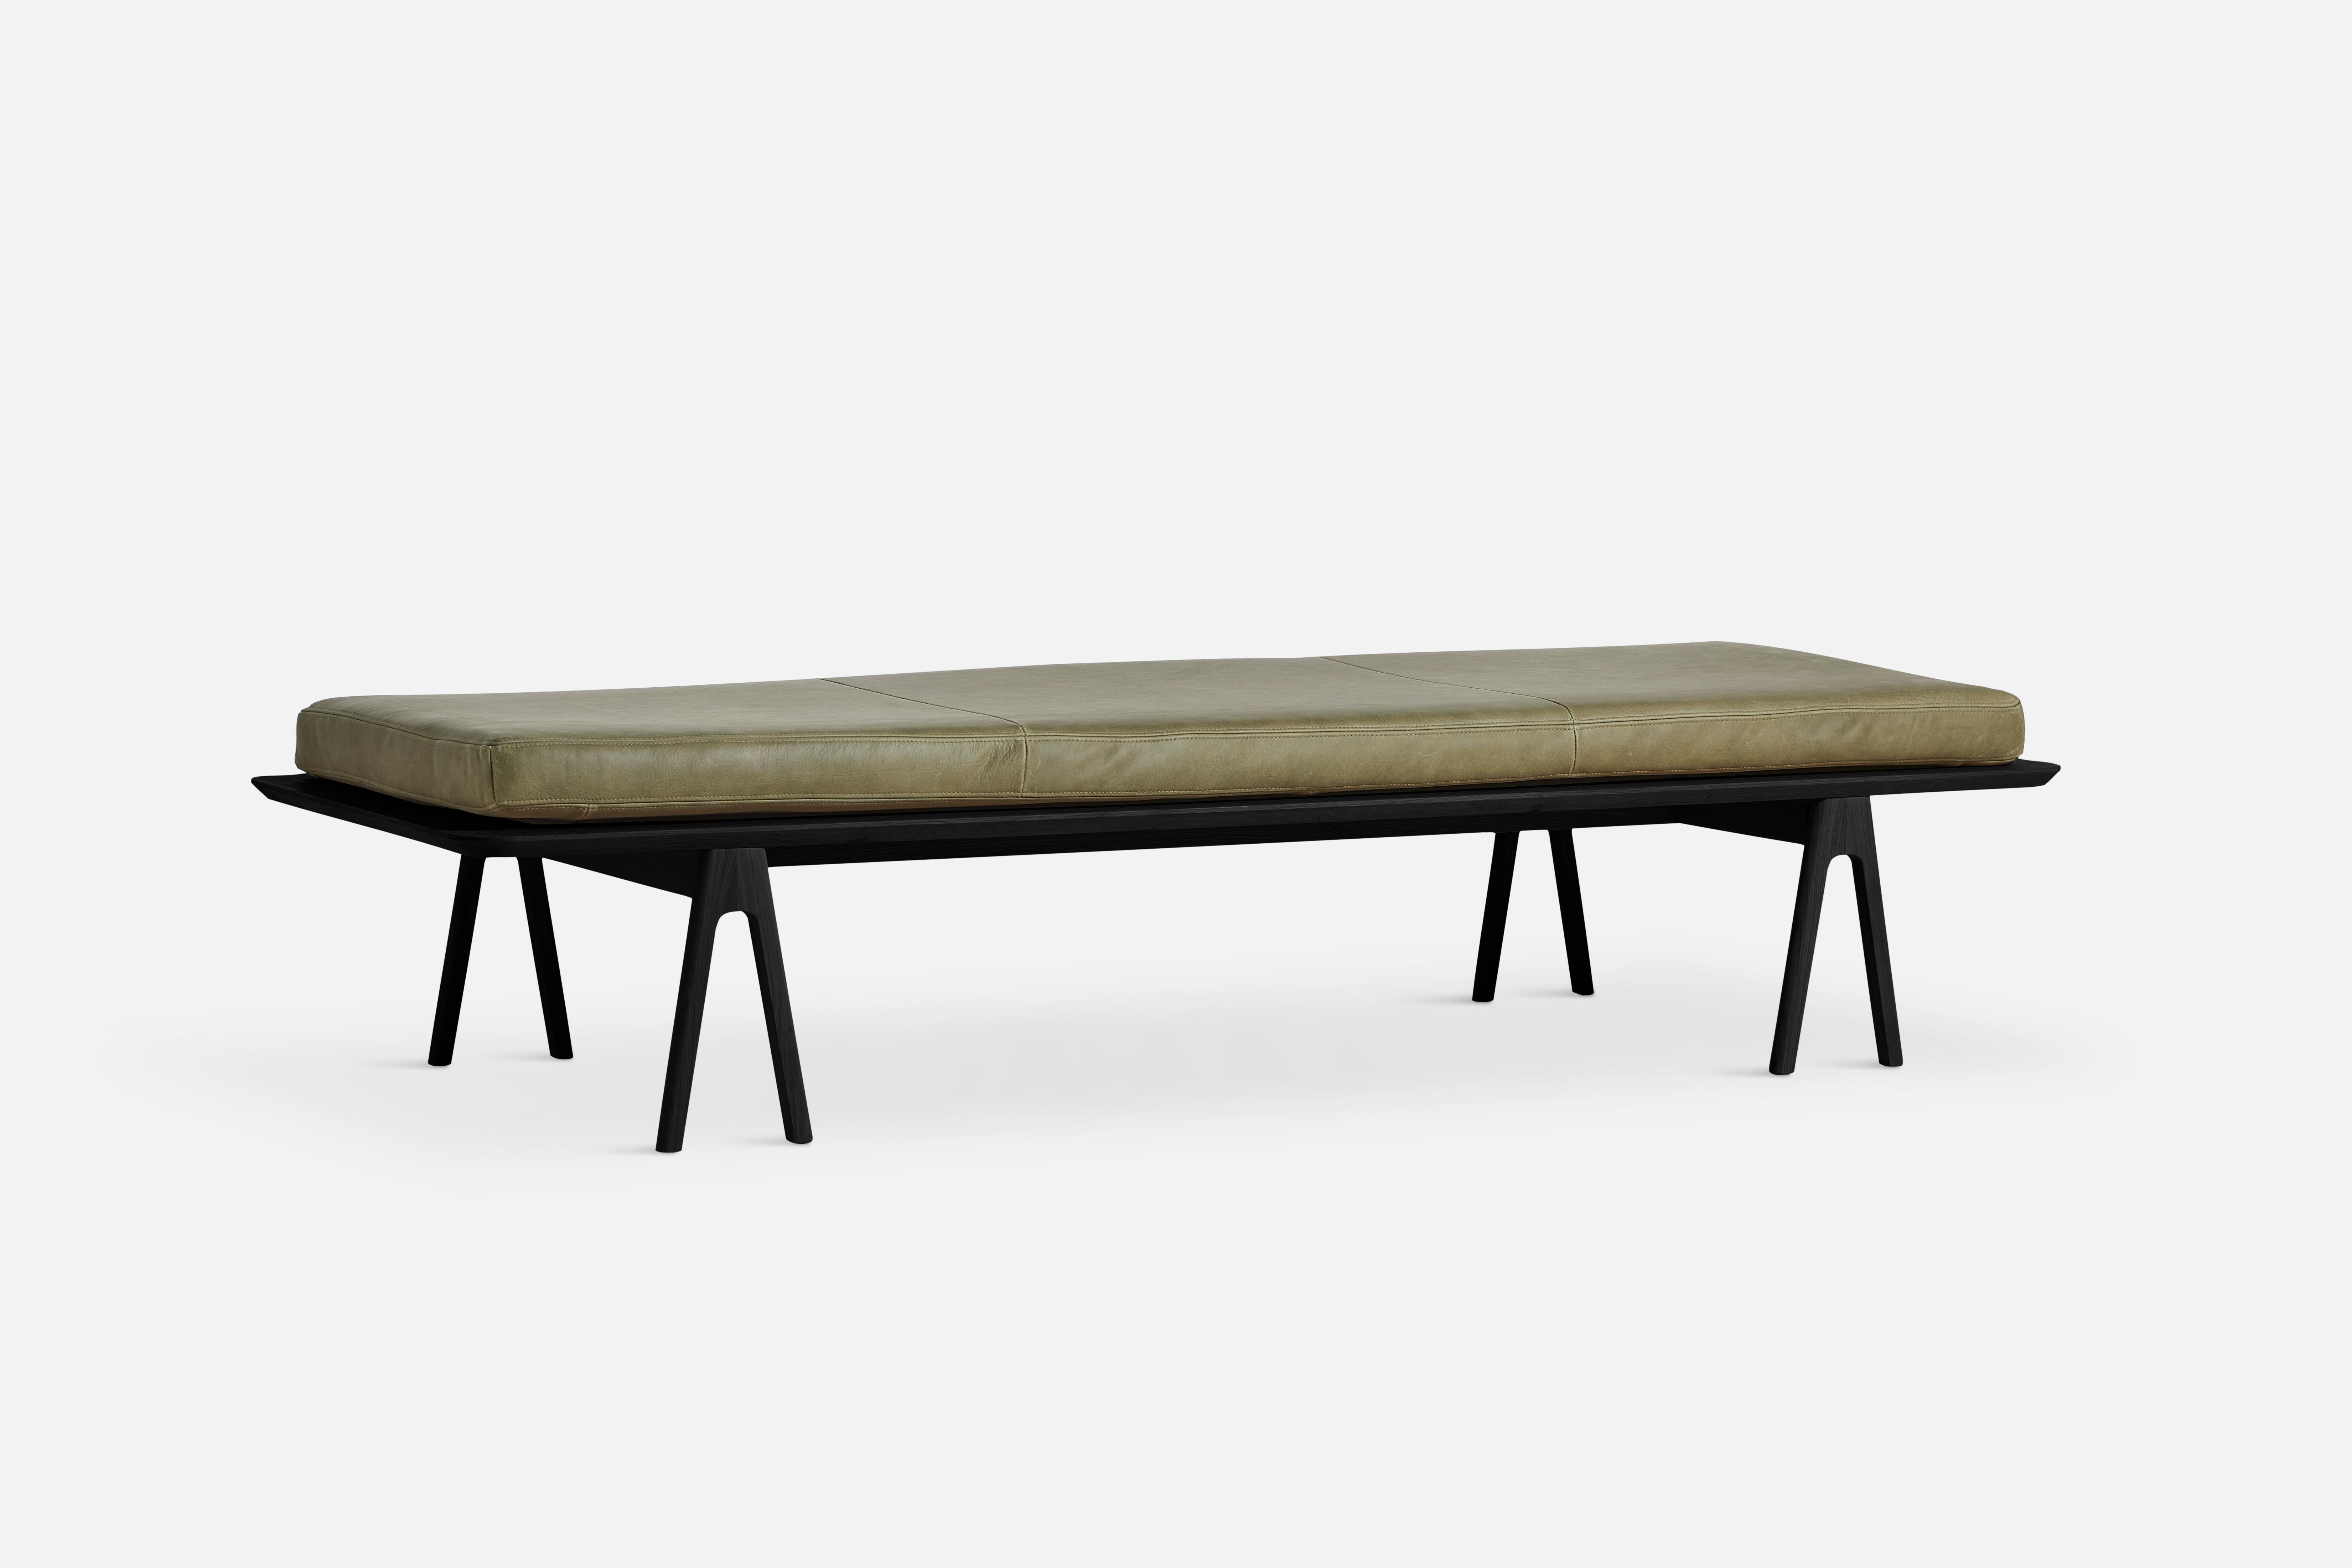 Moss green leather level daybed by MSDS Studio.
Materials: camo leather, foam, oak.
Dimensions: D 76.5 x W 190 x H 41 cm.

The founders, Mia and Torben Koed, decided to put their 30 years of experience into a new project. It was time for a